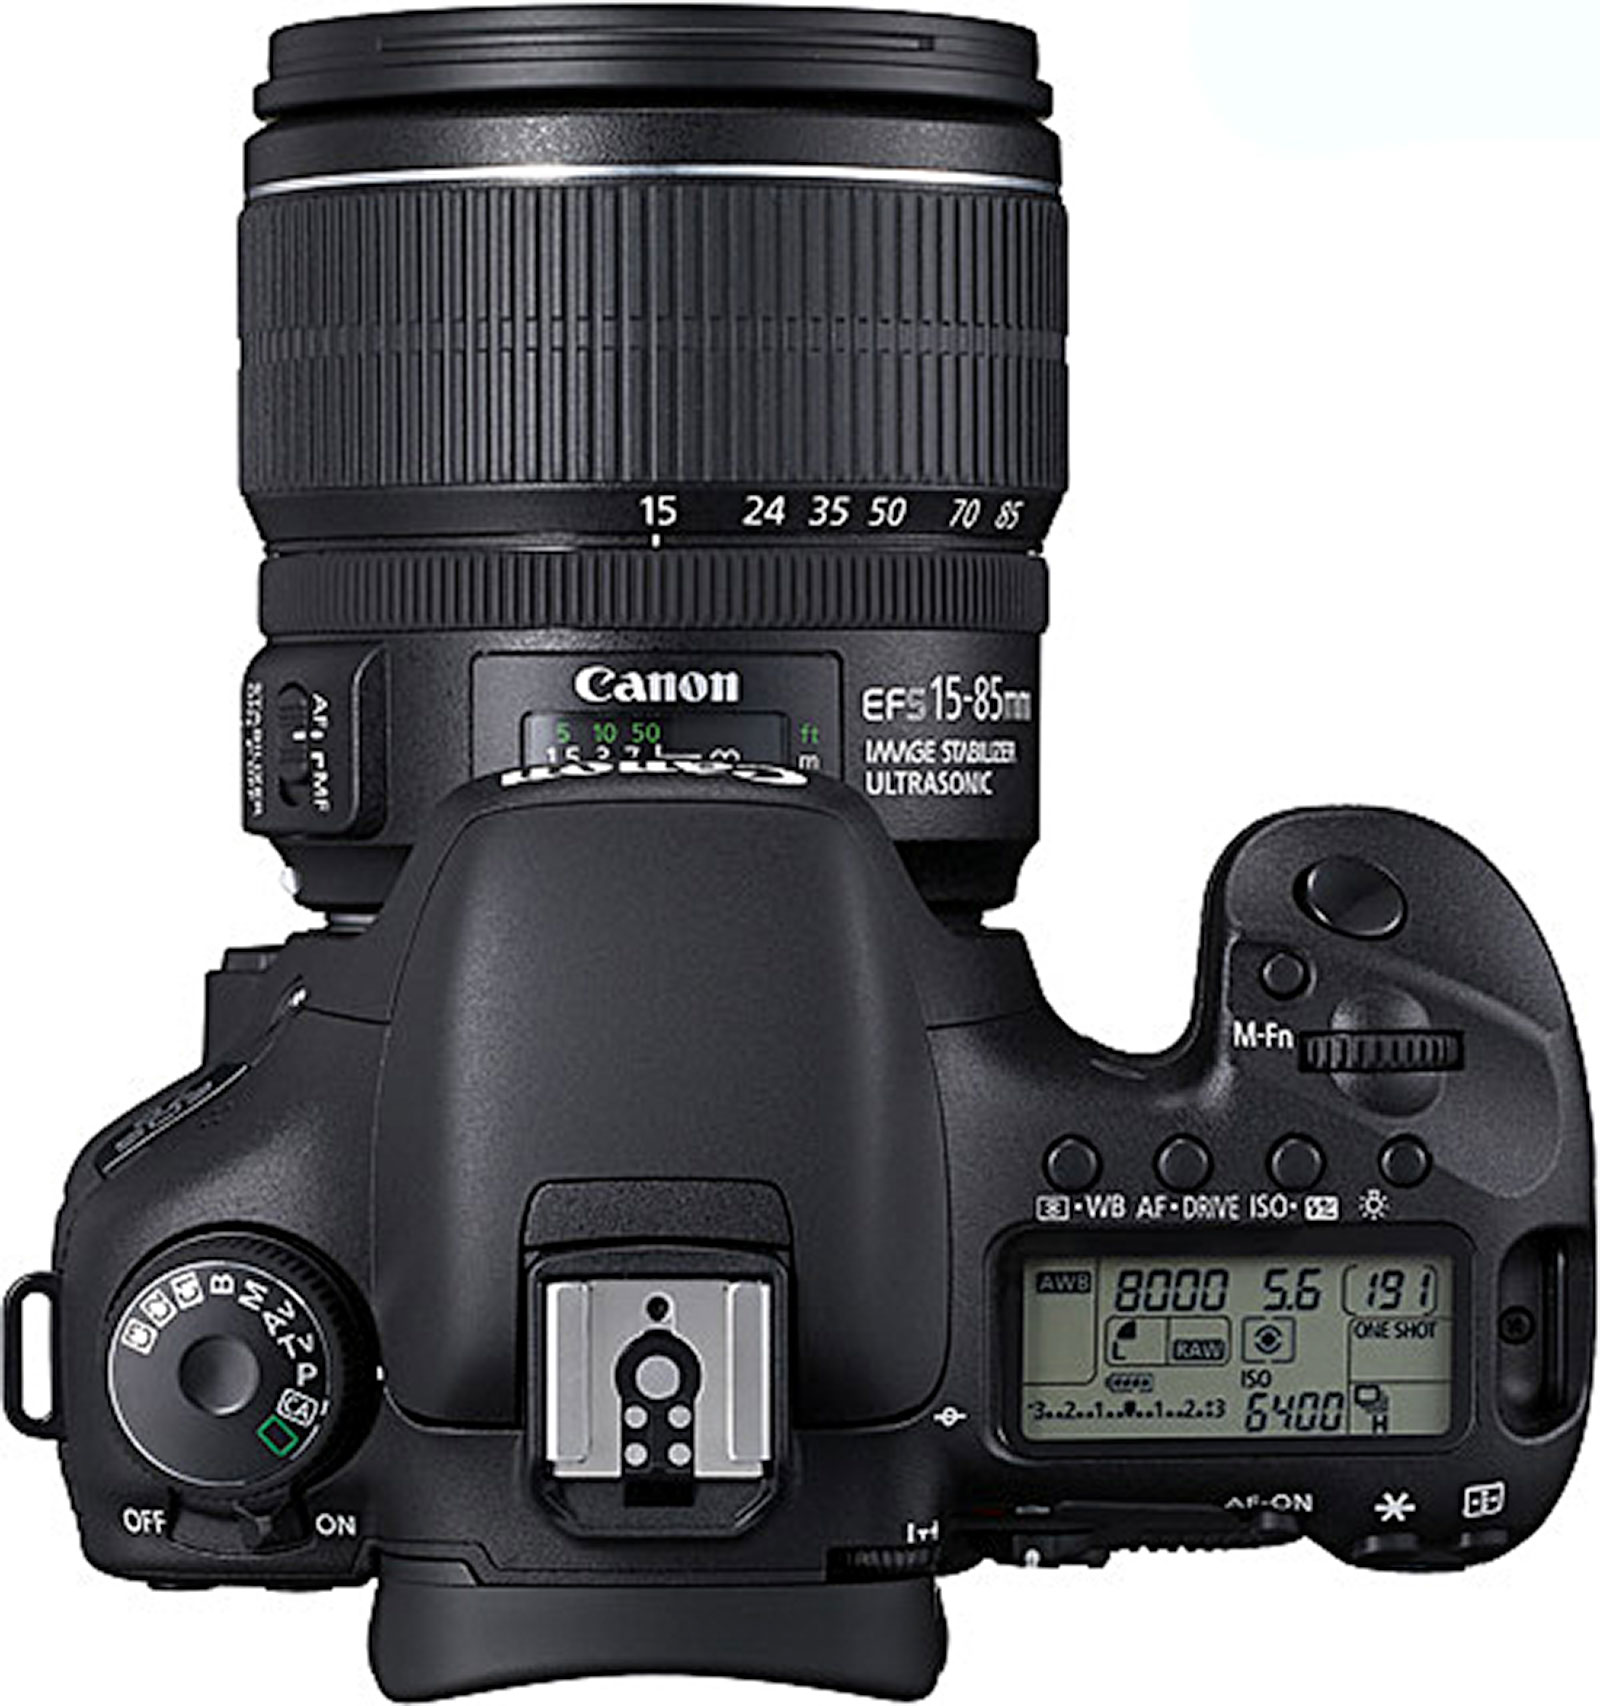 Canon-EF-S-15-85mm-f-3.5-5.6-IS-USM-Lens-on-7D-Top